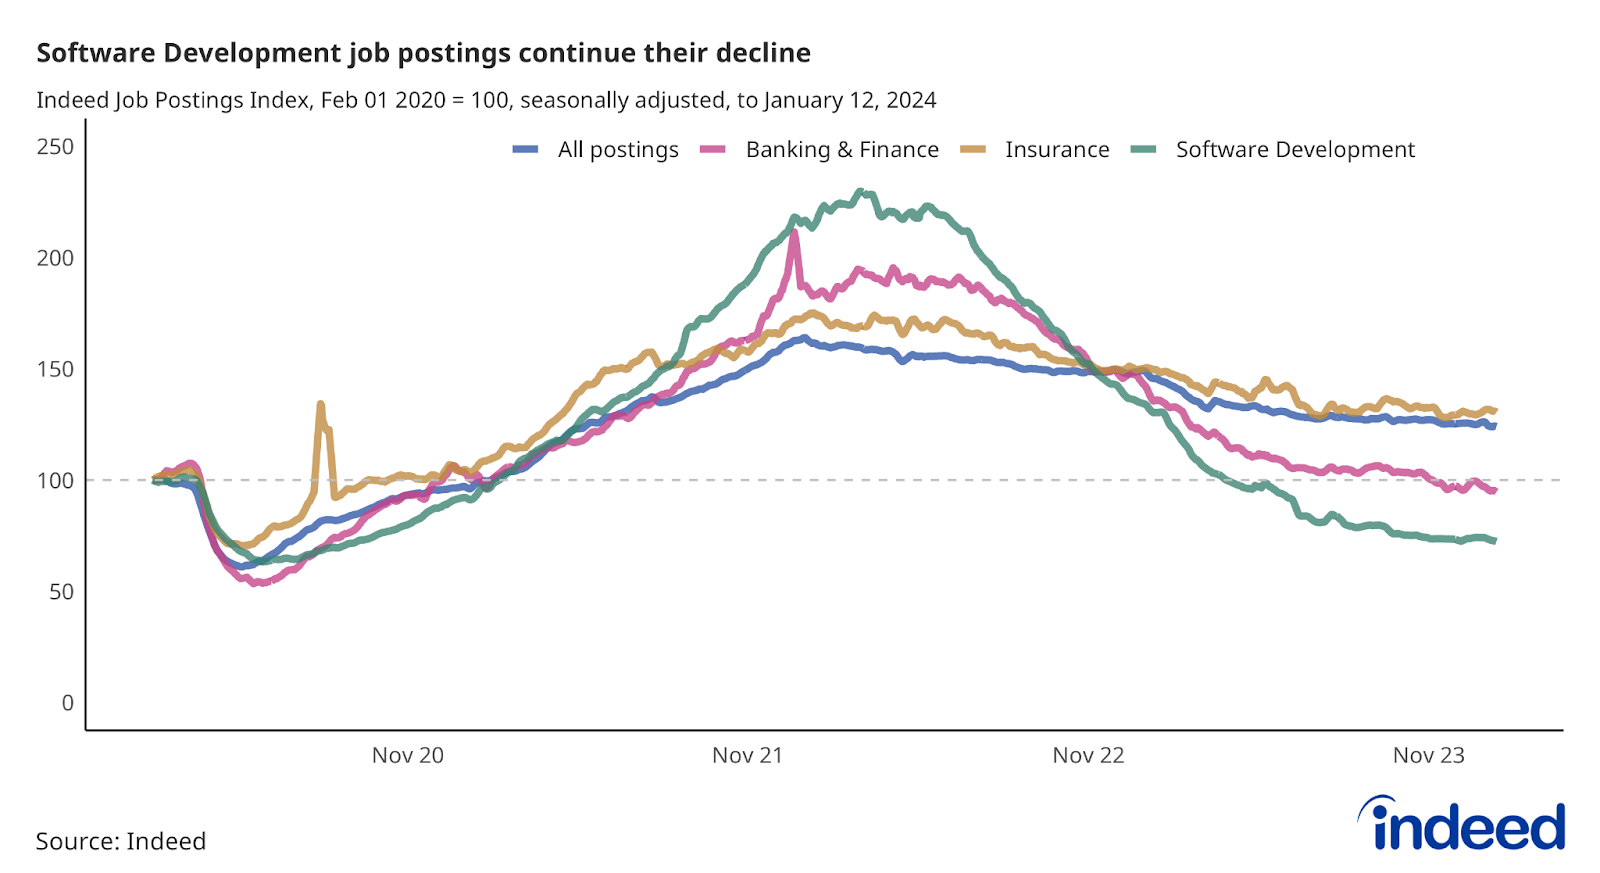 Line chart showing job postings in Banking & Finance, Insurance, and Software Development to January 12, 2024. Banking & Finance and Software Development postings have fallen below their pre-pandemic level.